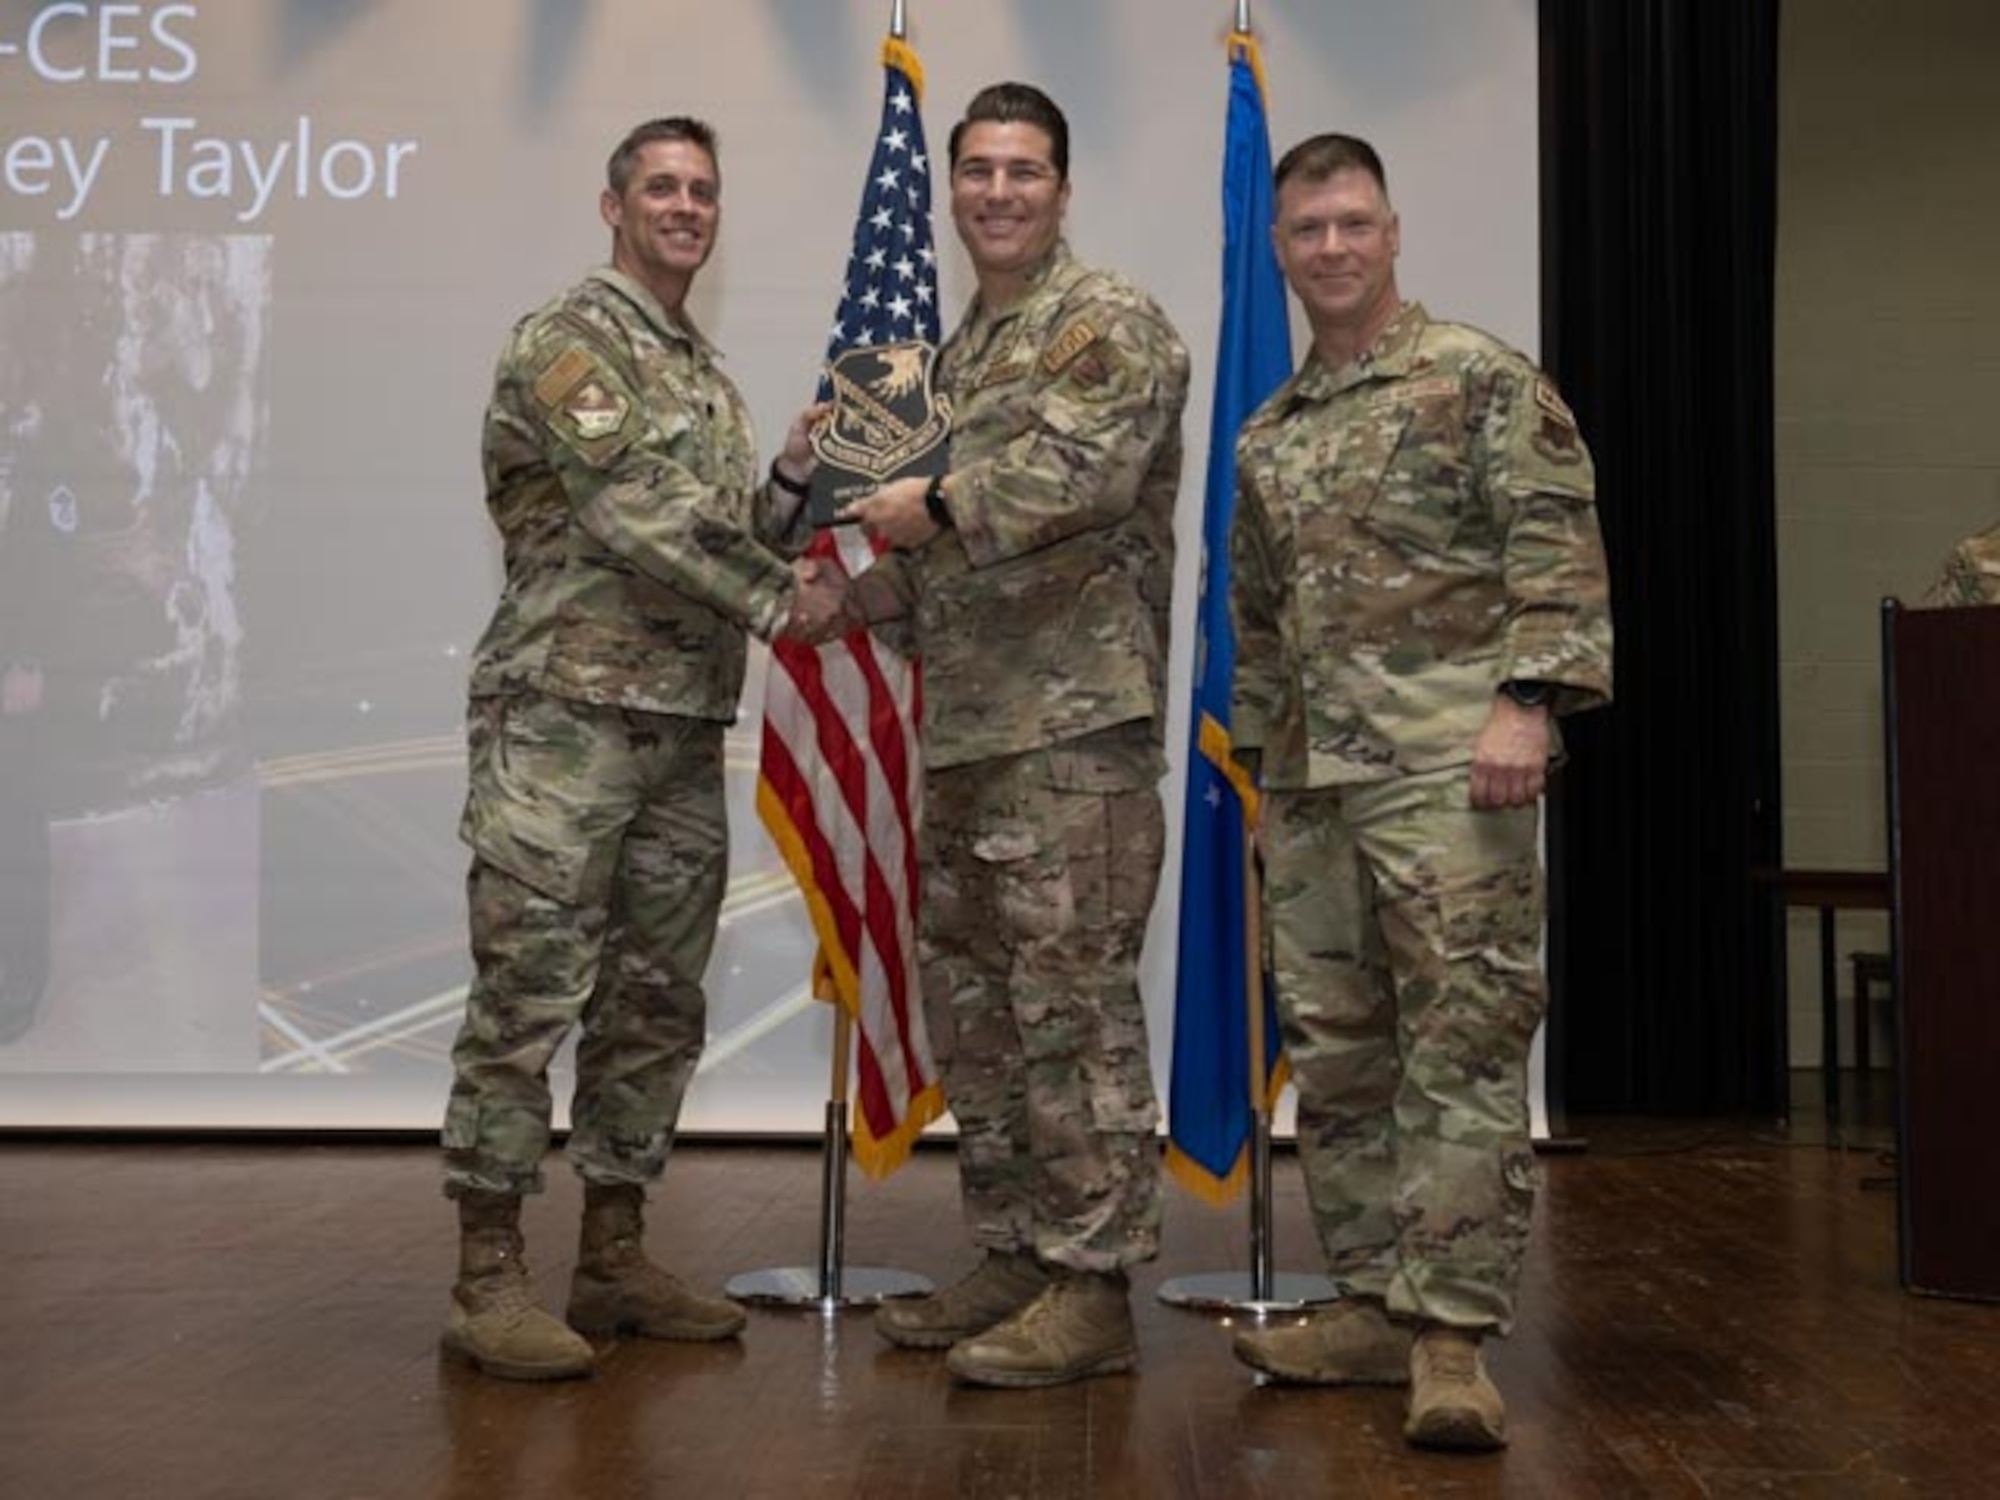 U.S. Air Force Lt. Col. James Melvin, left, Mission Support Group deputy commander, and Chief Master Sgt. Edward Mueller, right, Mission Support Group senior enlisted leader, Master Sgt. Bradley Taylor, center, section chief of explosive ordnance disposal logistics and supply with the Senior Noncommissioned Officer of the First Quarter Award at Seymour Johnson Air Force Base, North Carolina, April 19, 2024. The ceremony recognized the award winners for their exceptional leadership during the first quarter. (U.S. Air Force photo by Airman Megan Cusmano)